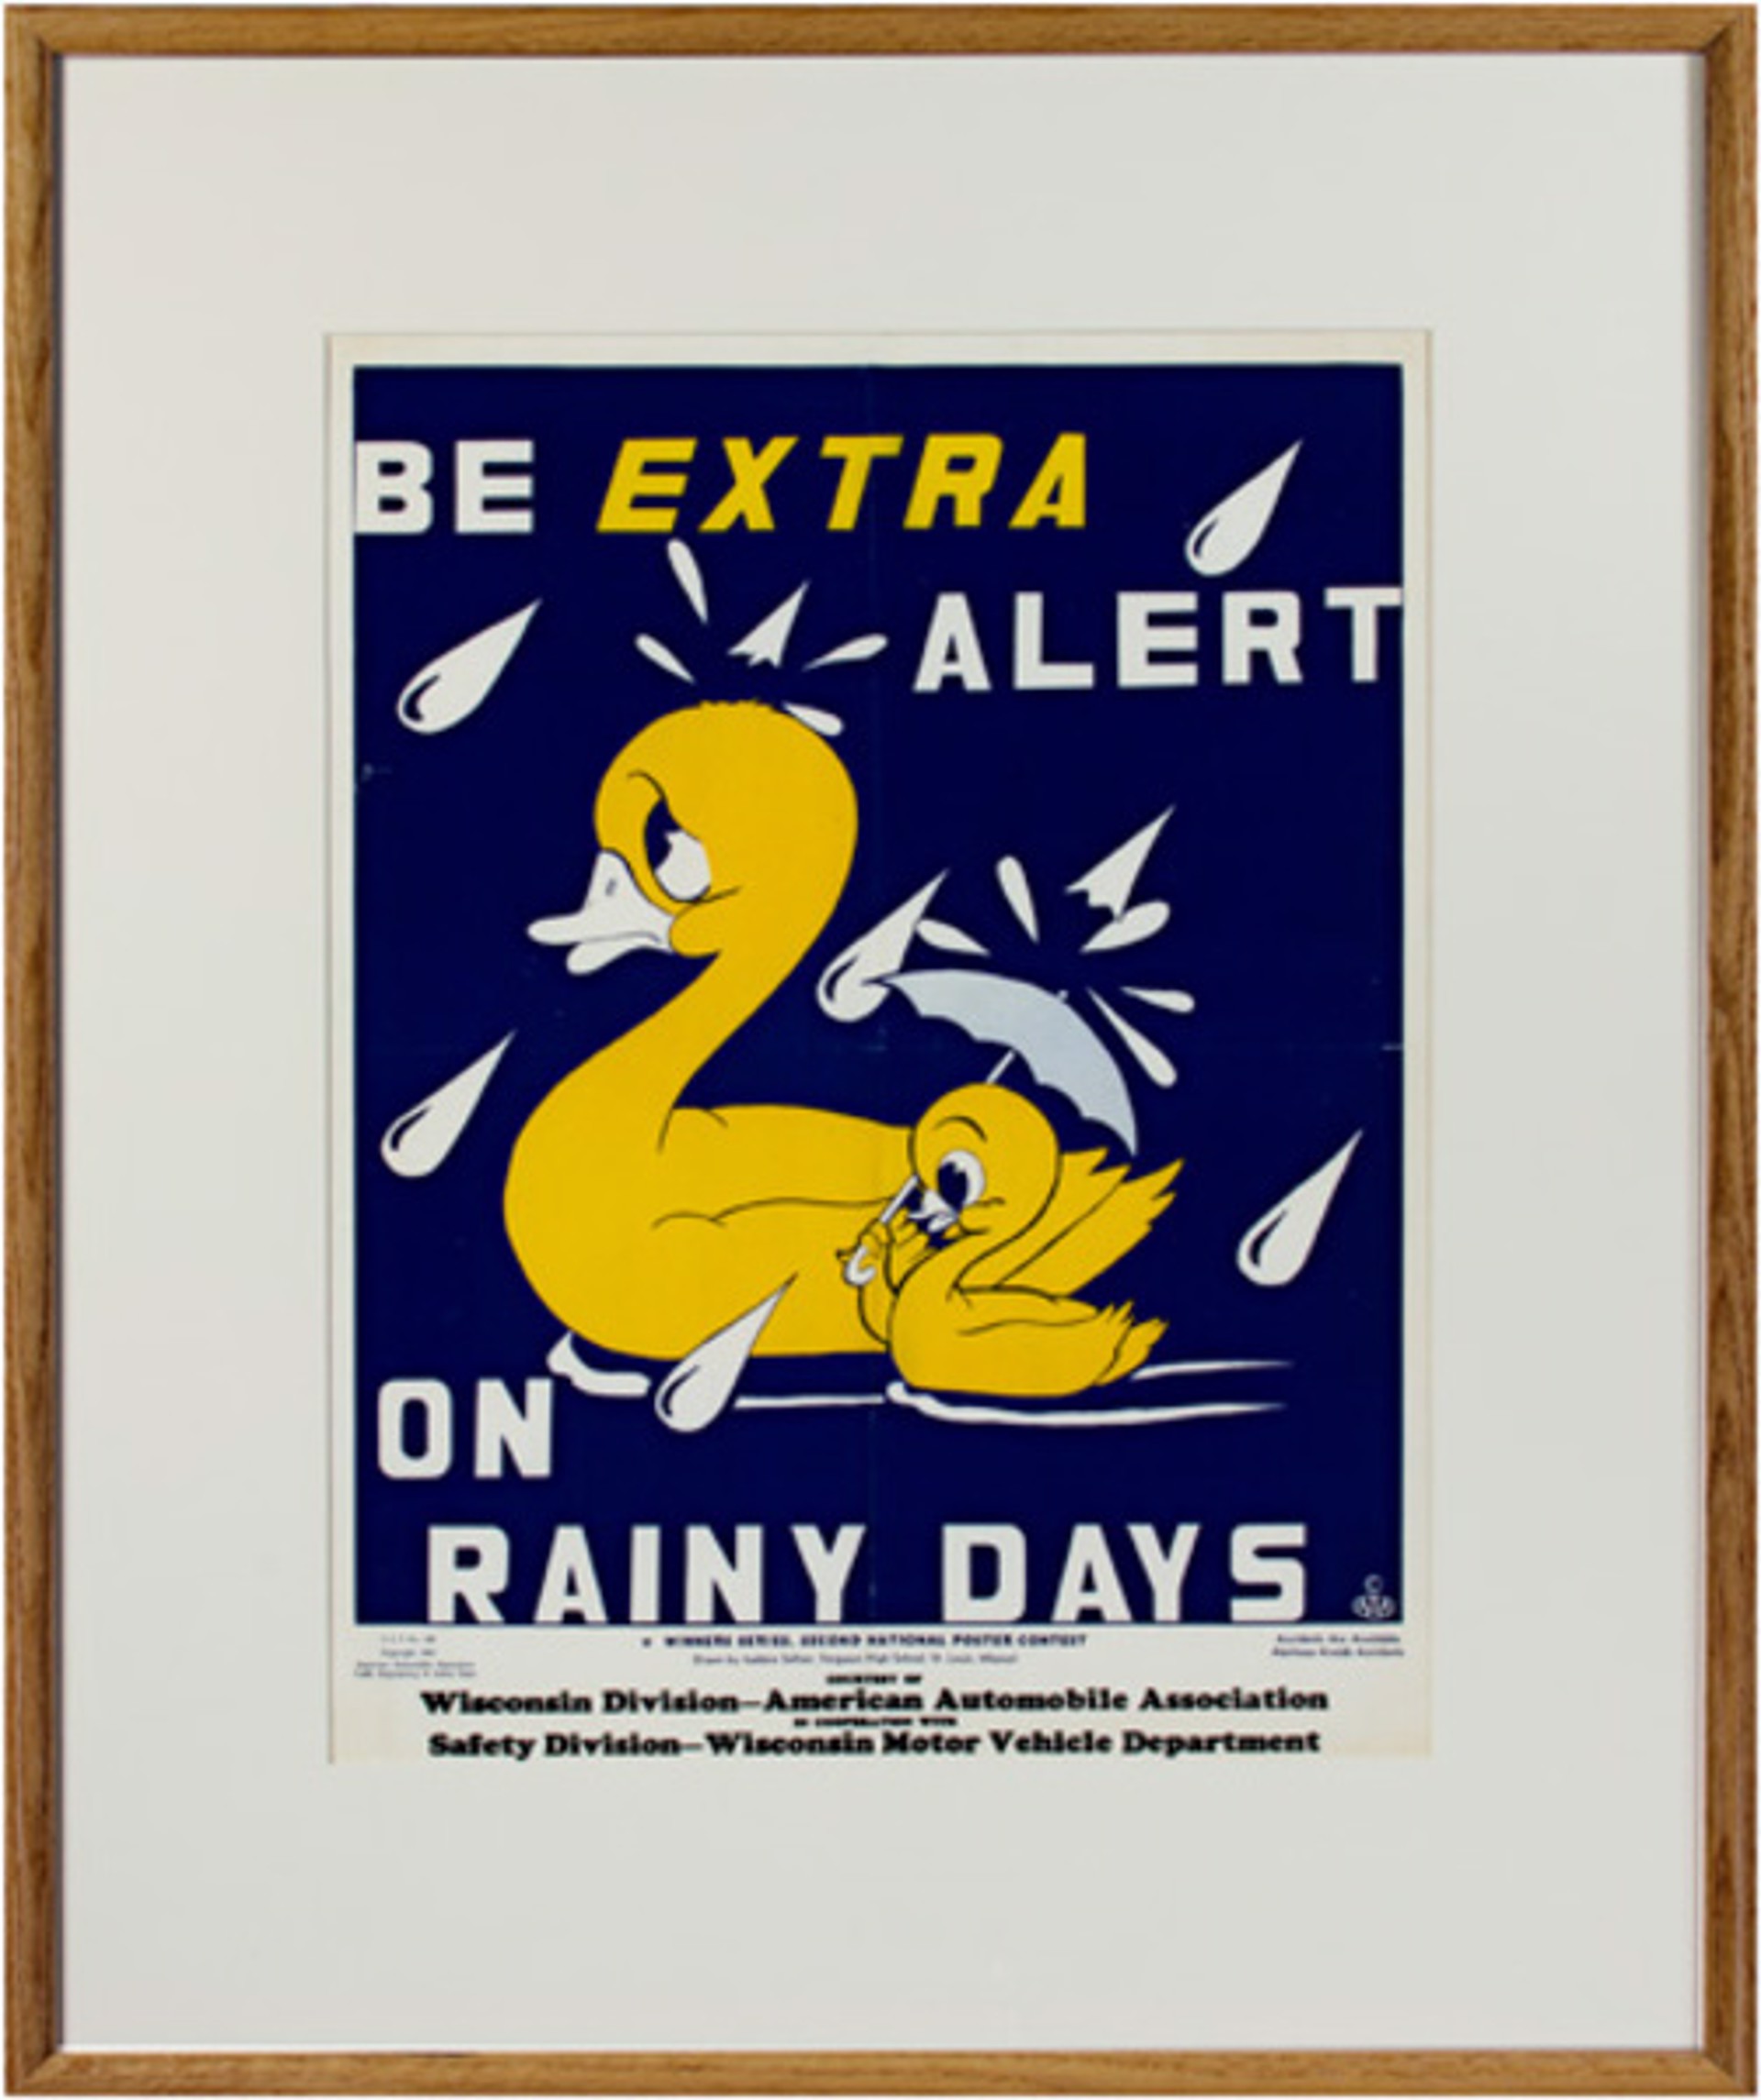 Be Extra Alert on Rainy Days (Ducks) drawn by Isadore Seltzer (WI Div. American Automobile Assoc.) by Isadore Seltzer